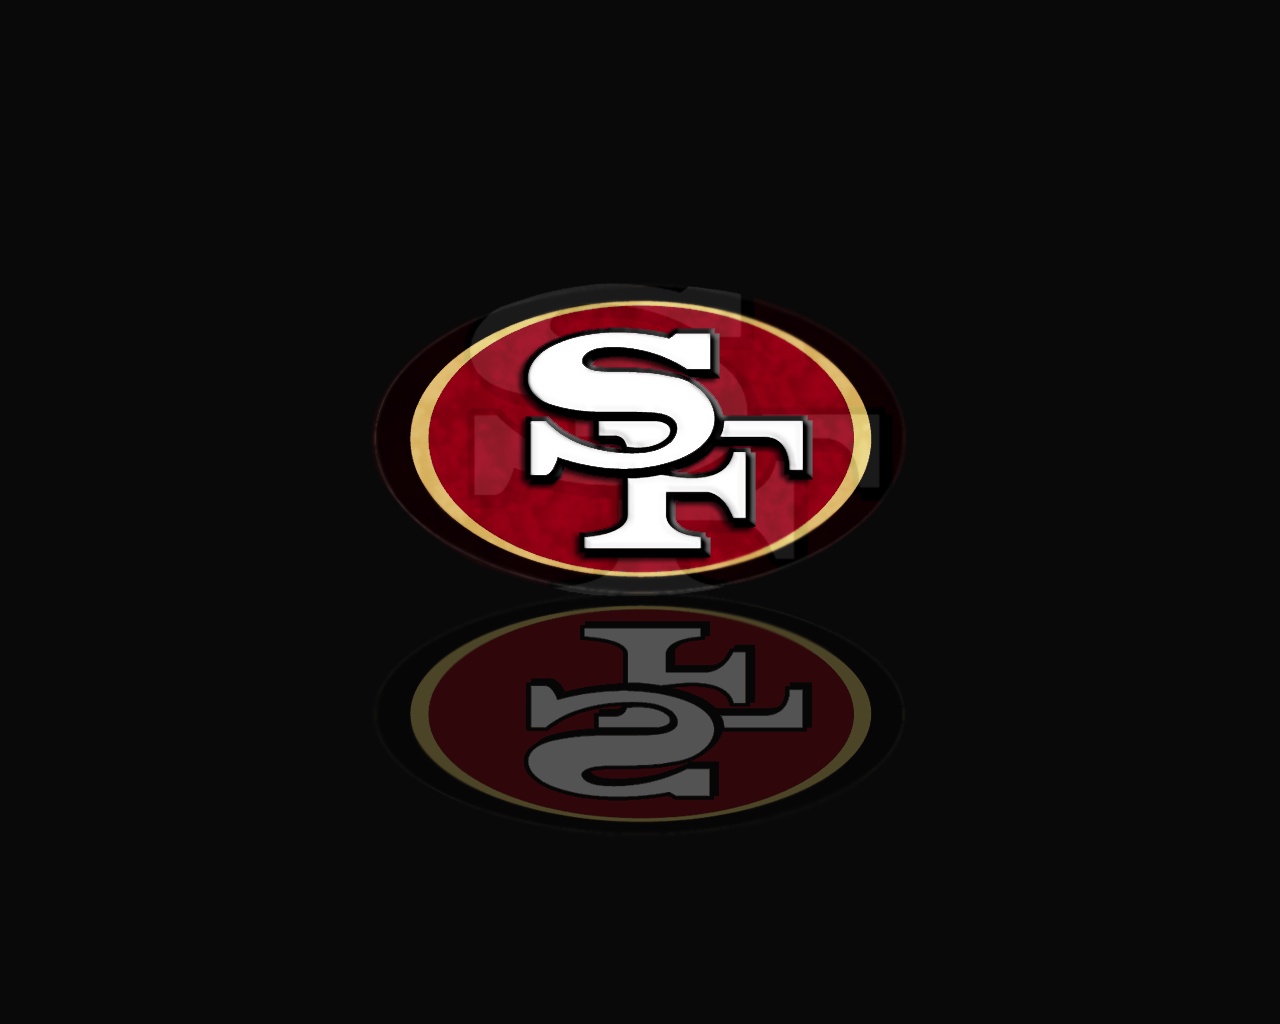 SF 49ers Wallpaper by Exetus on deviantART